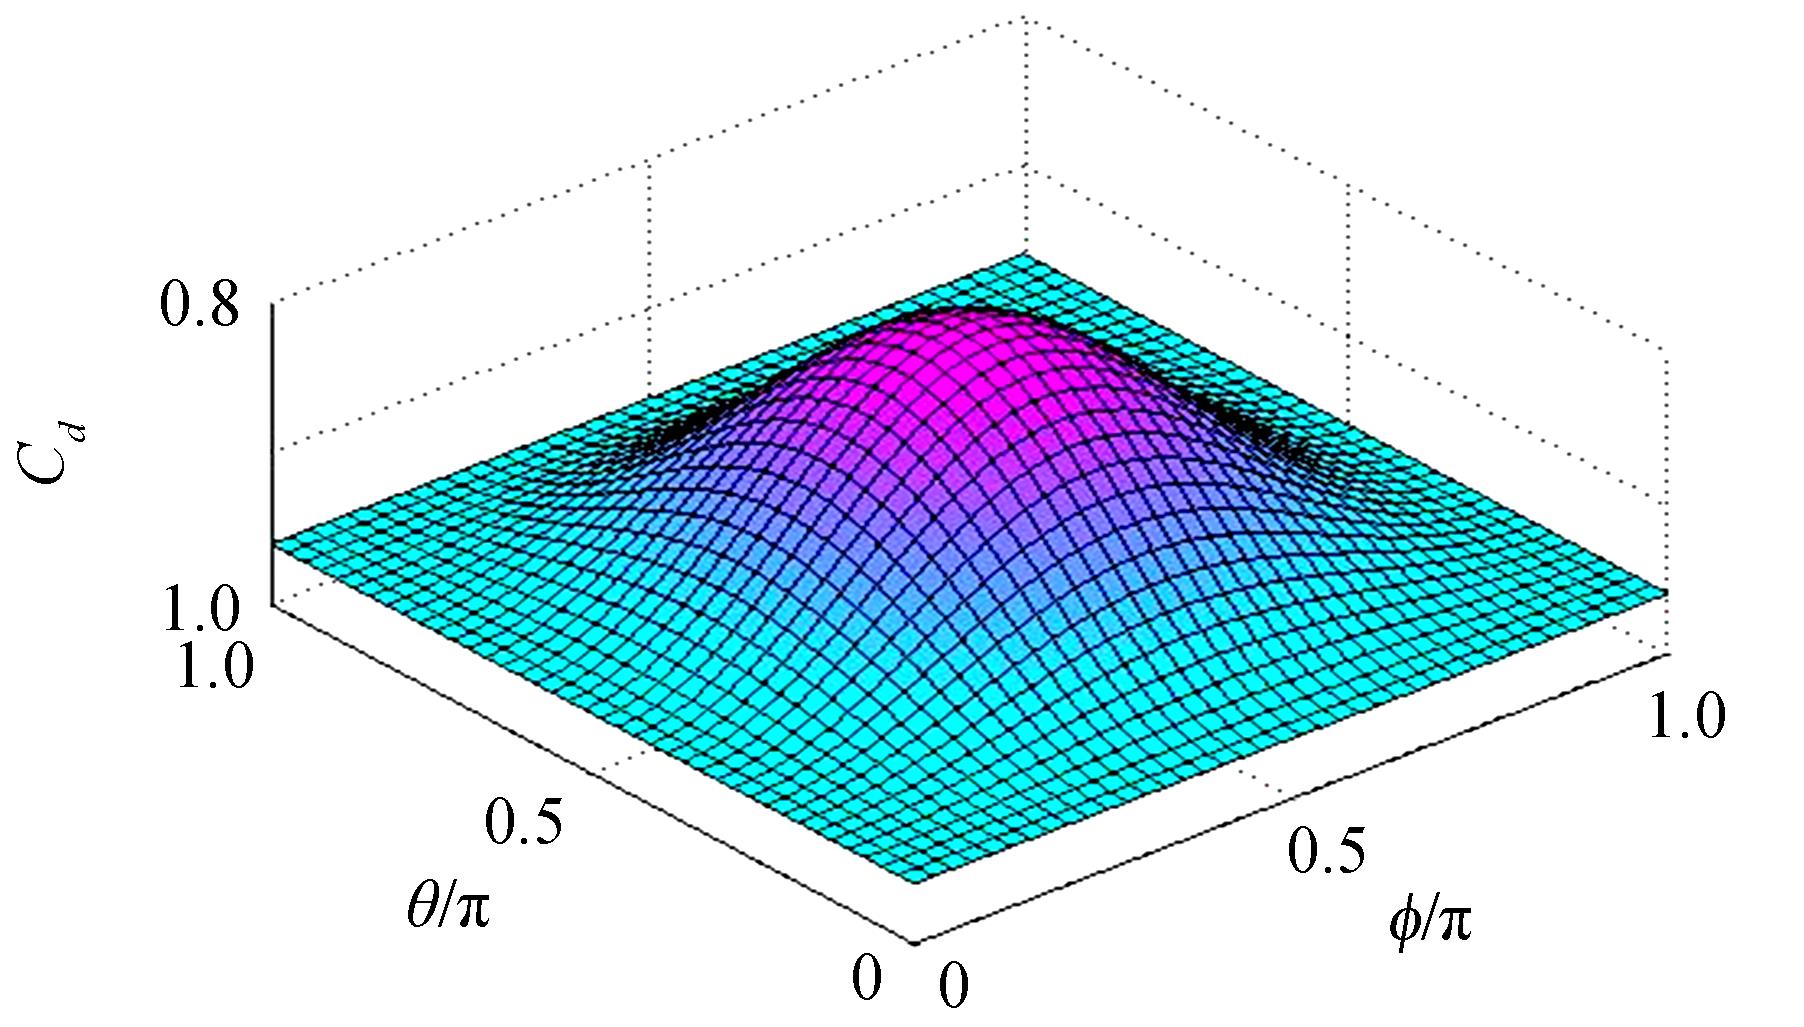 The dependence of Cd on θ and ϕ, where the superposition coefficients of the initial state α=β=(1/2)1/2 and the noise strength d=0.2